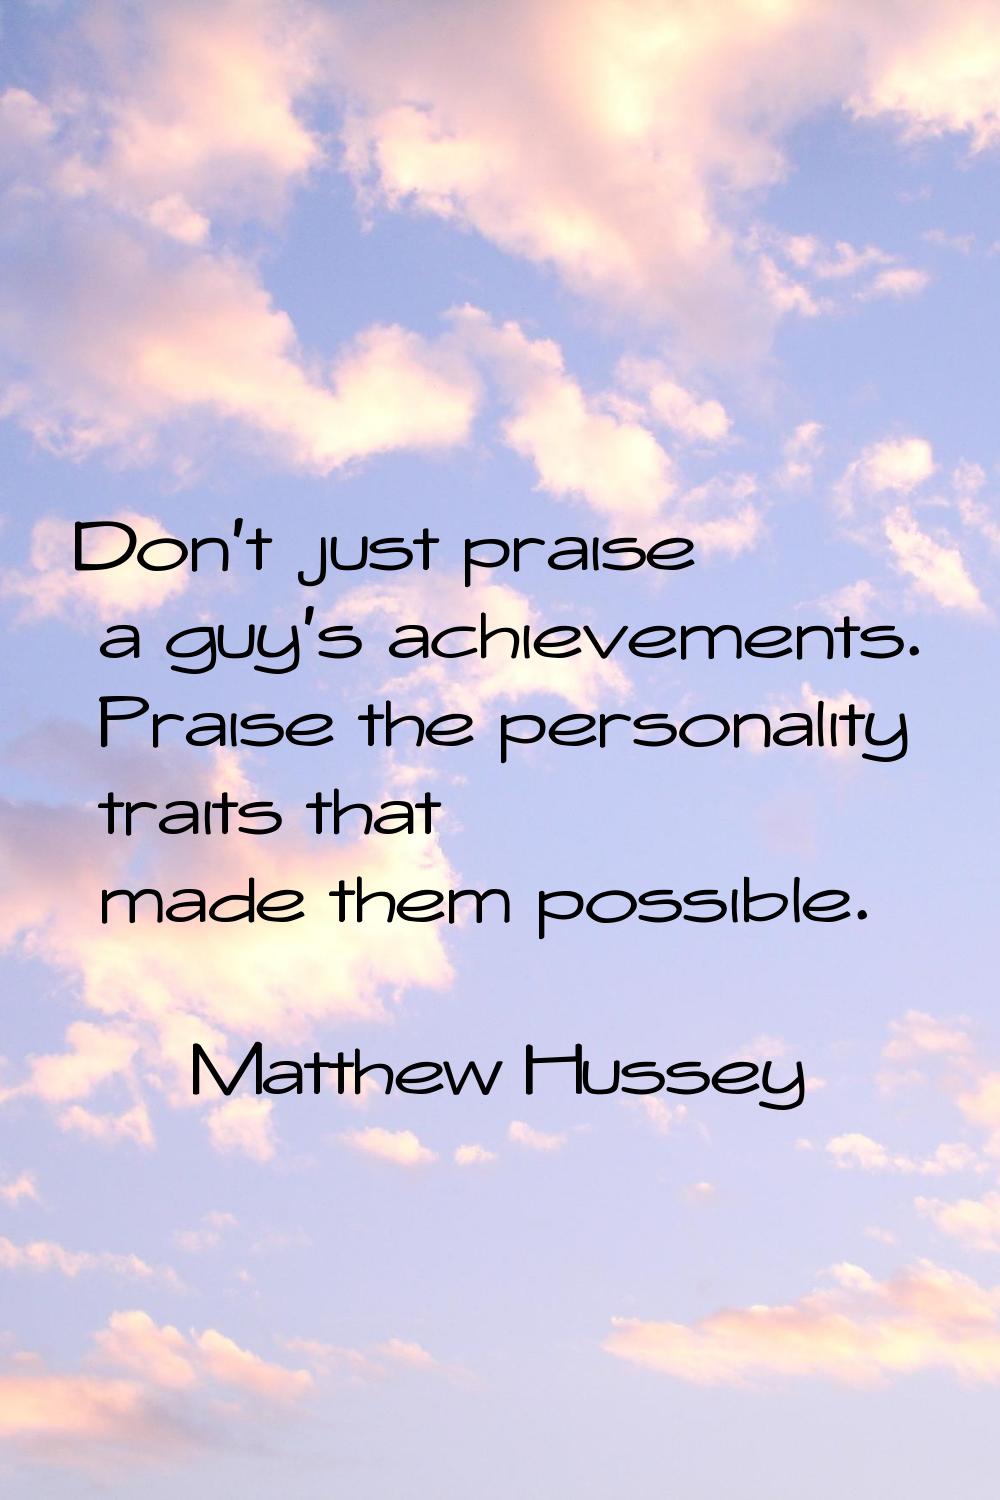 Don't just praise a guy's achievements. Praise the personality traits that made them possible.